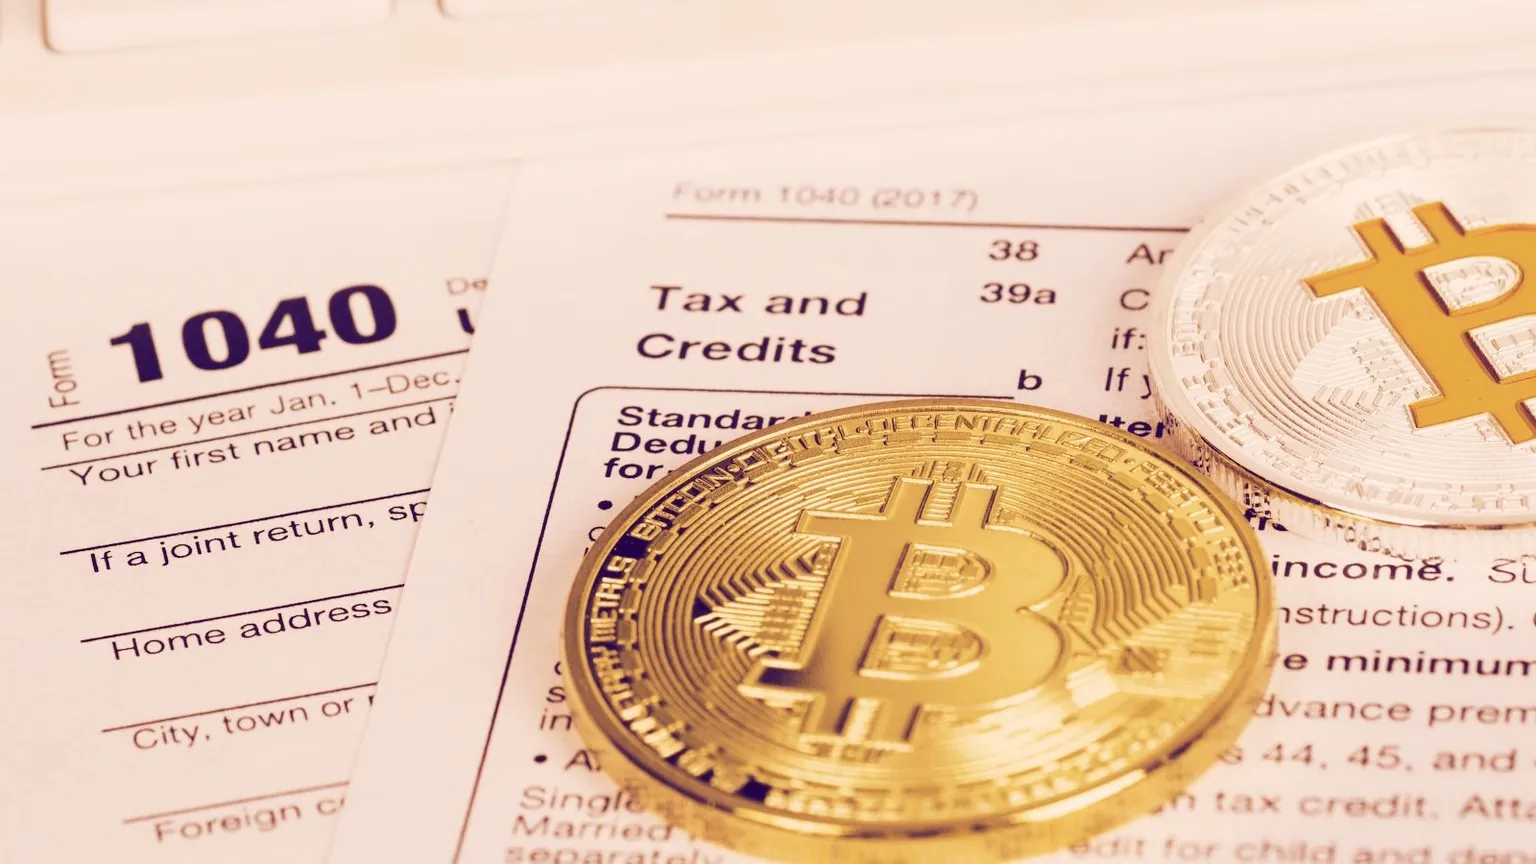 Filing your crypto taxes. IMAGE: Shutterstock